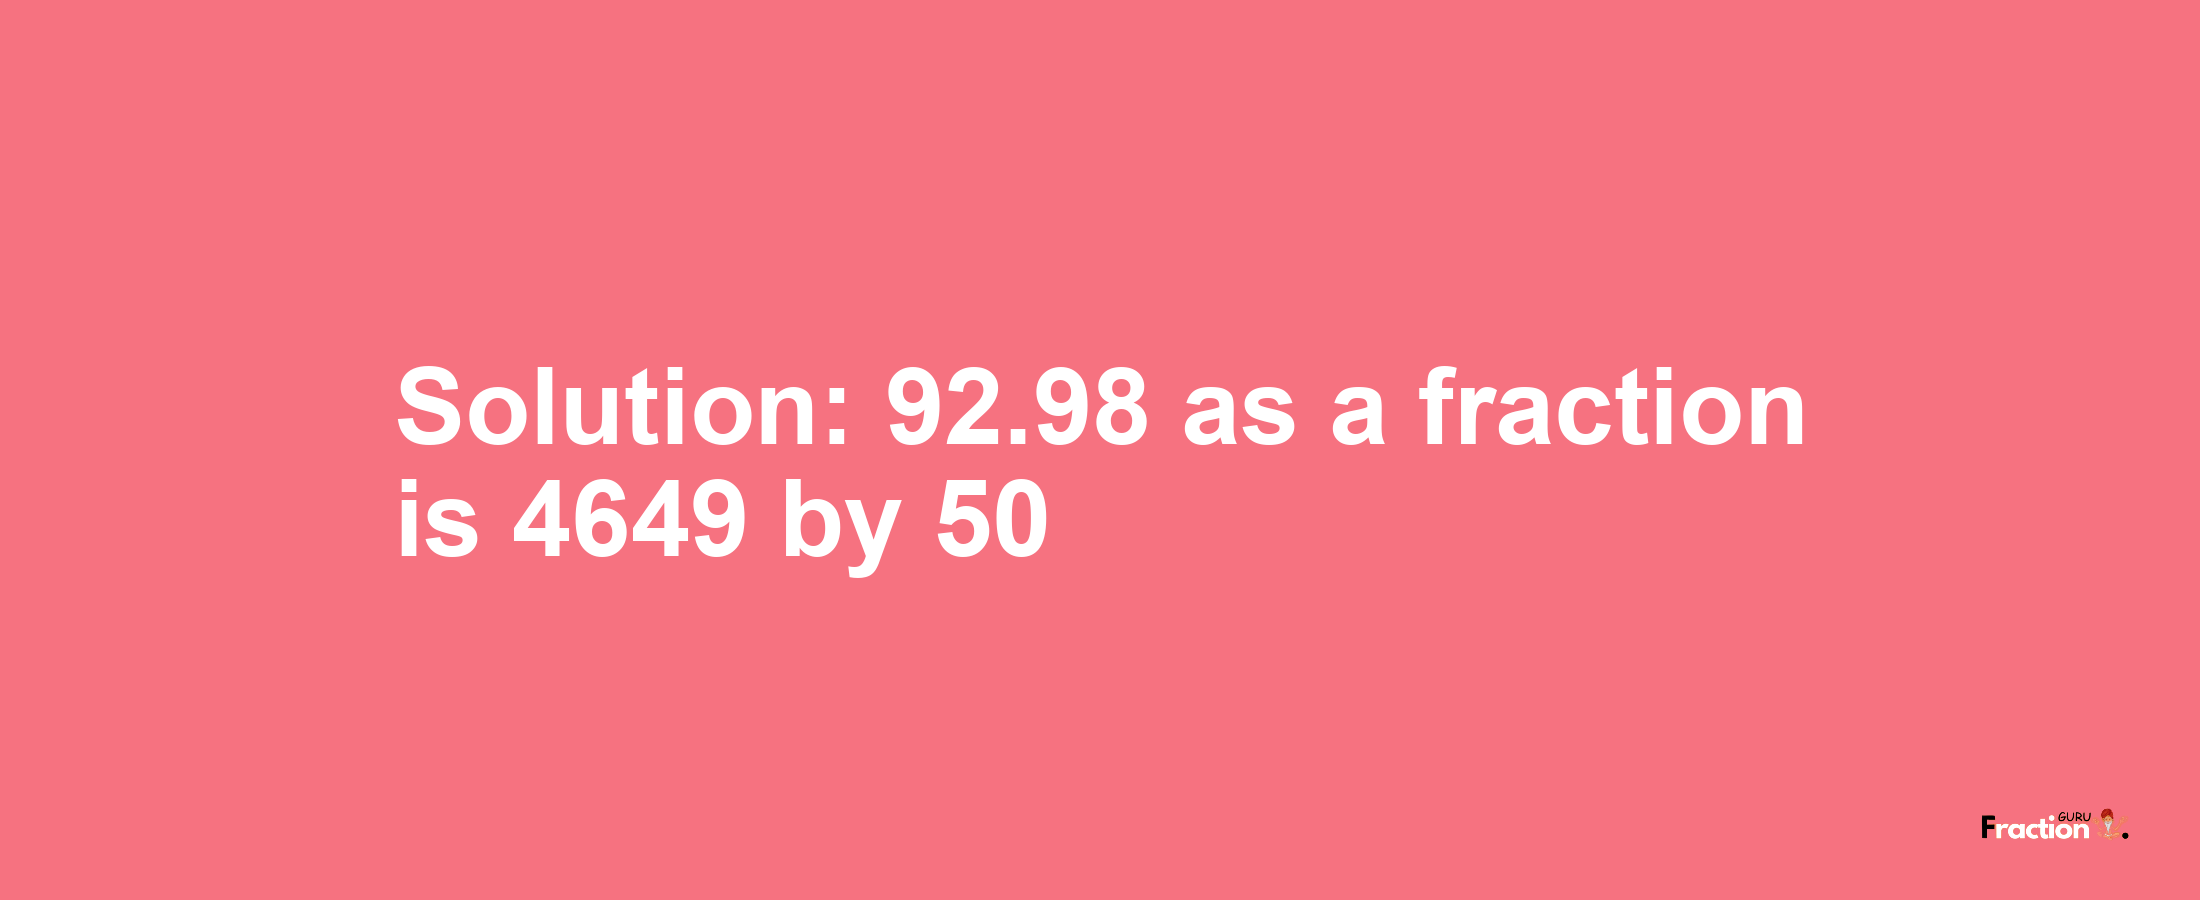 Solution:92.98 as a fraction is 4649/50